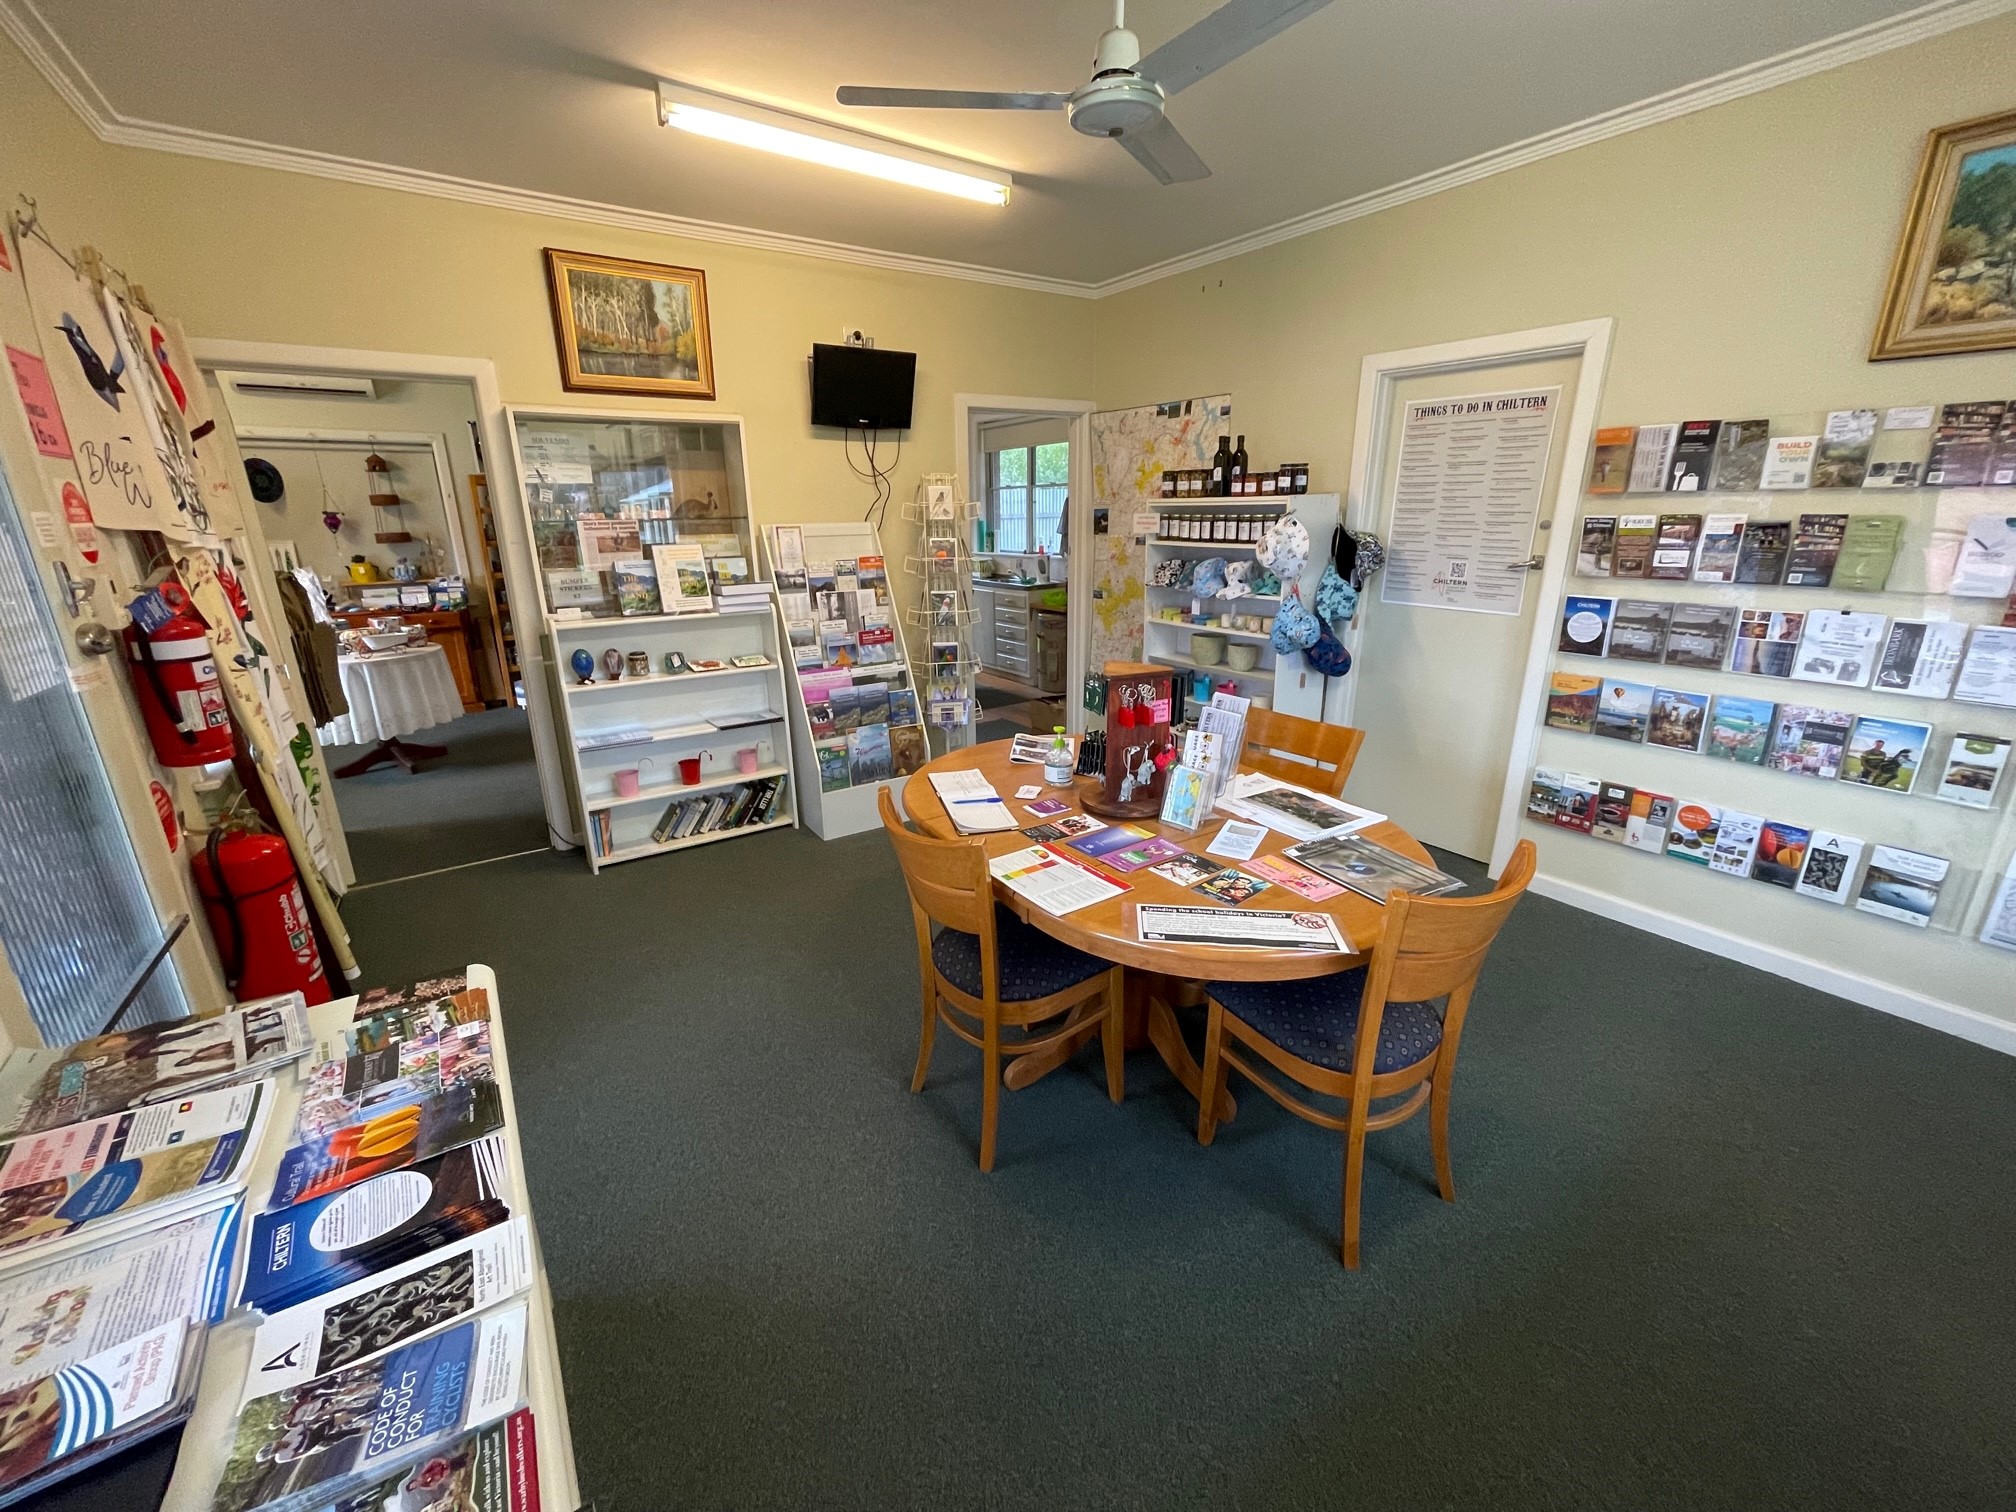 Main room of Chiltern info centre with large round table in the middle of the room and brochures on the wall.